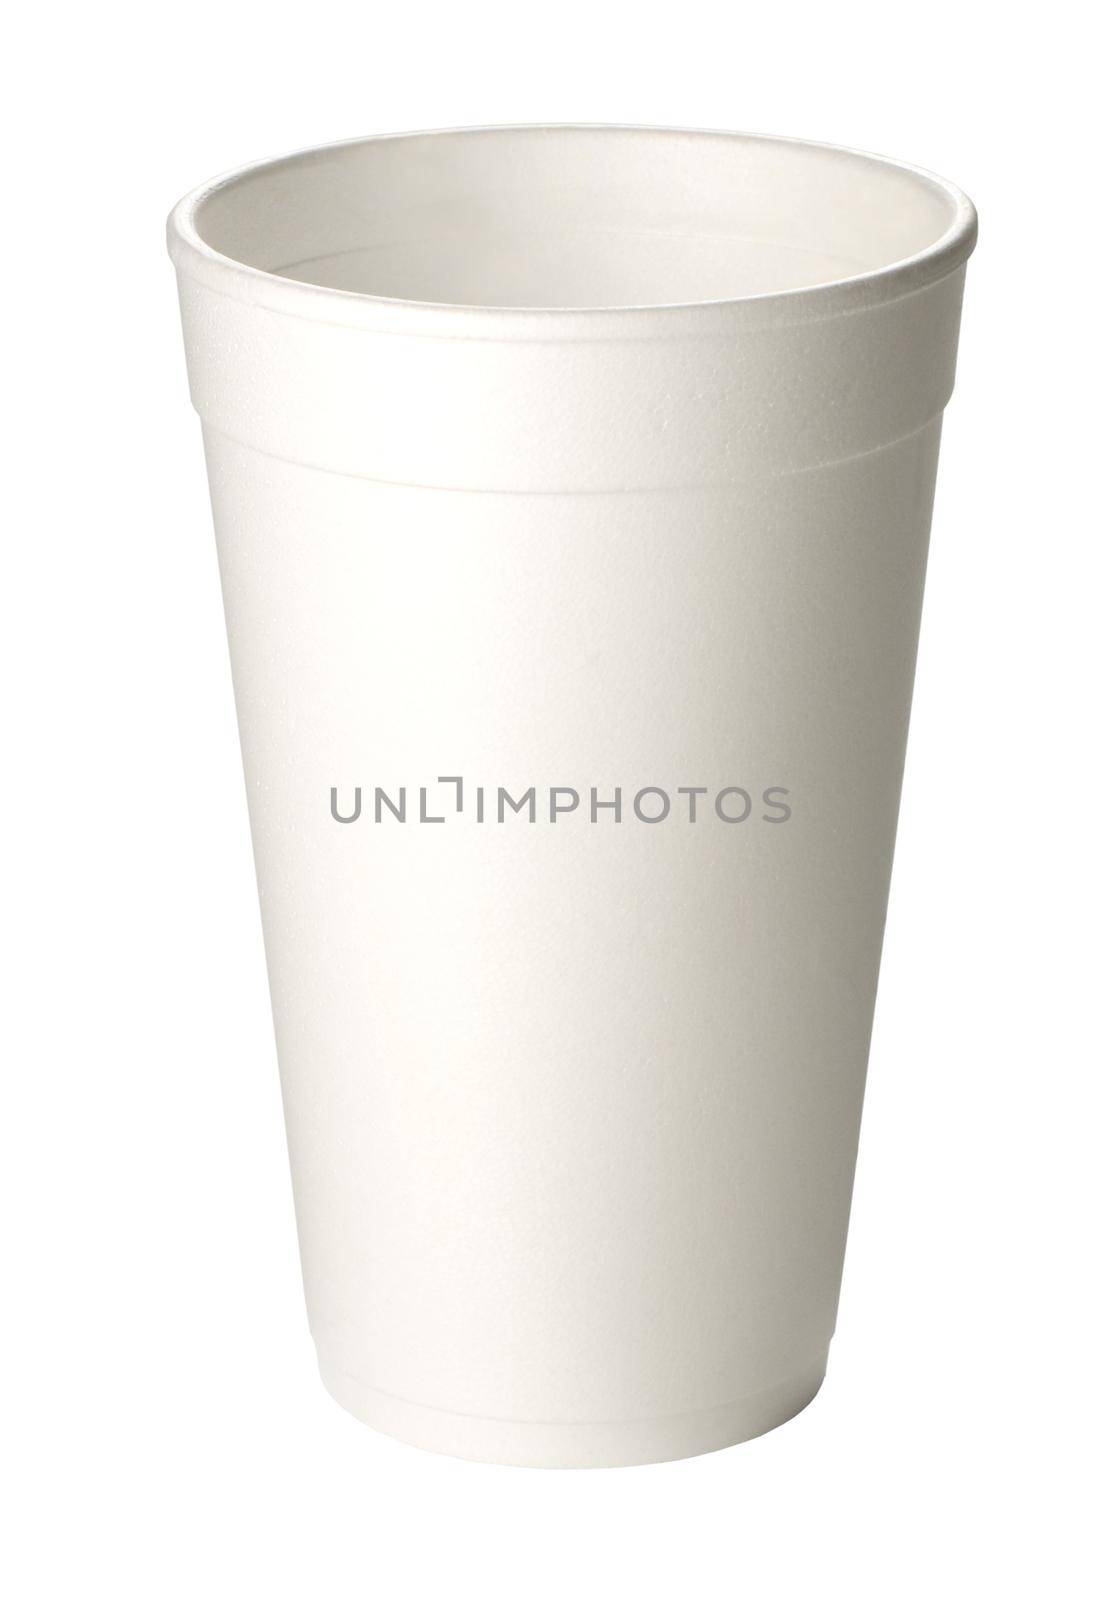 close up of coffee cup on white background with clipping path